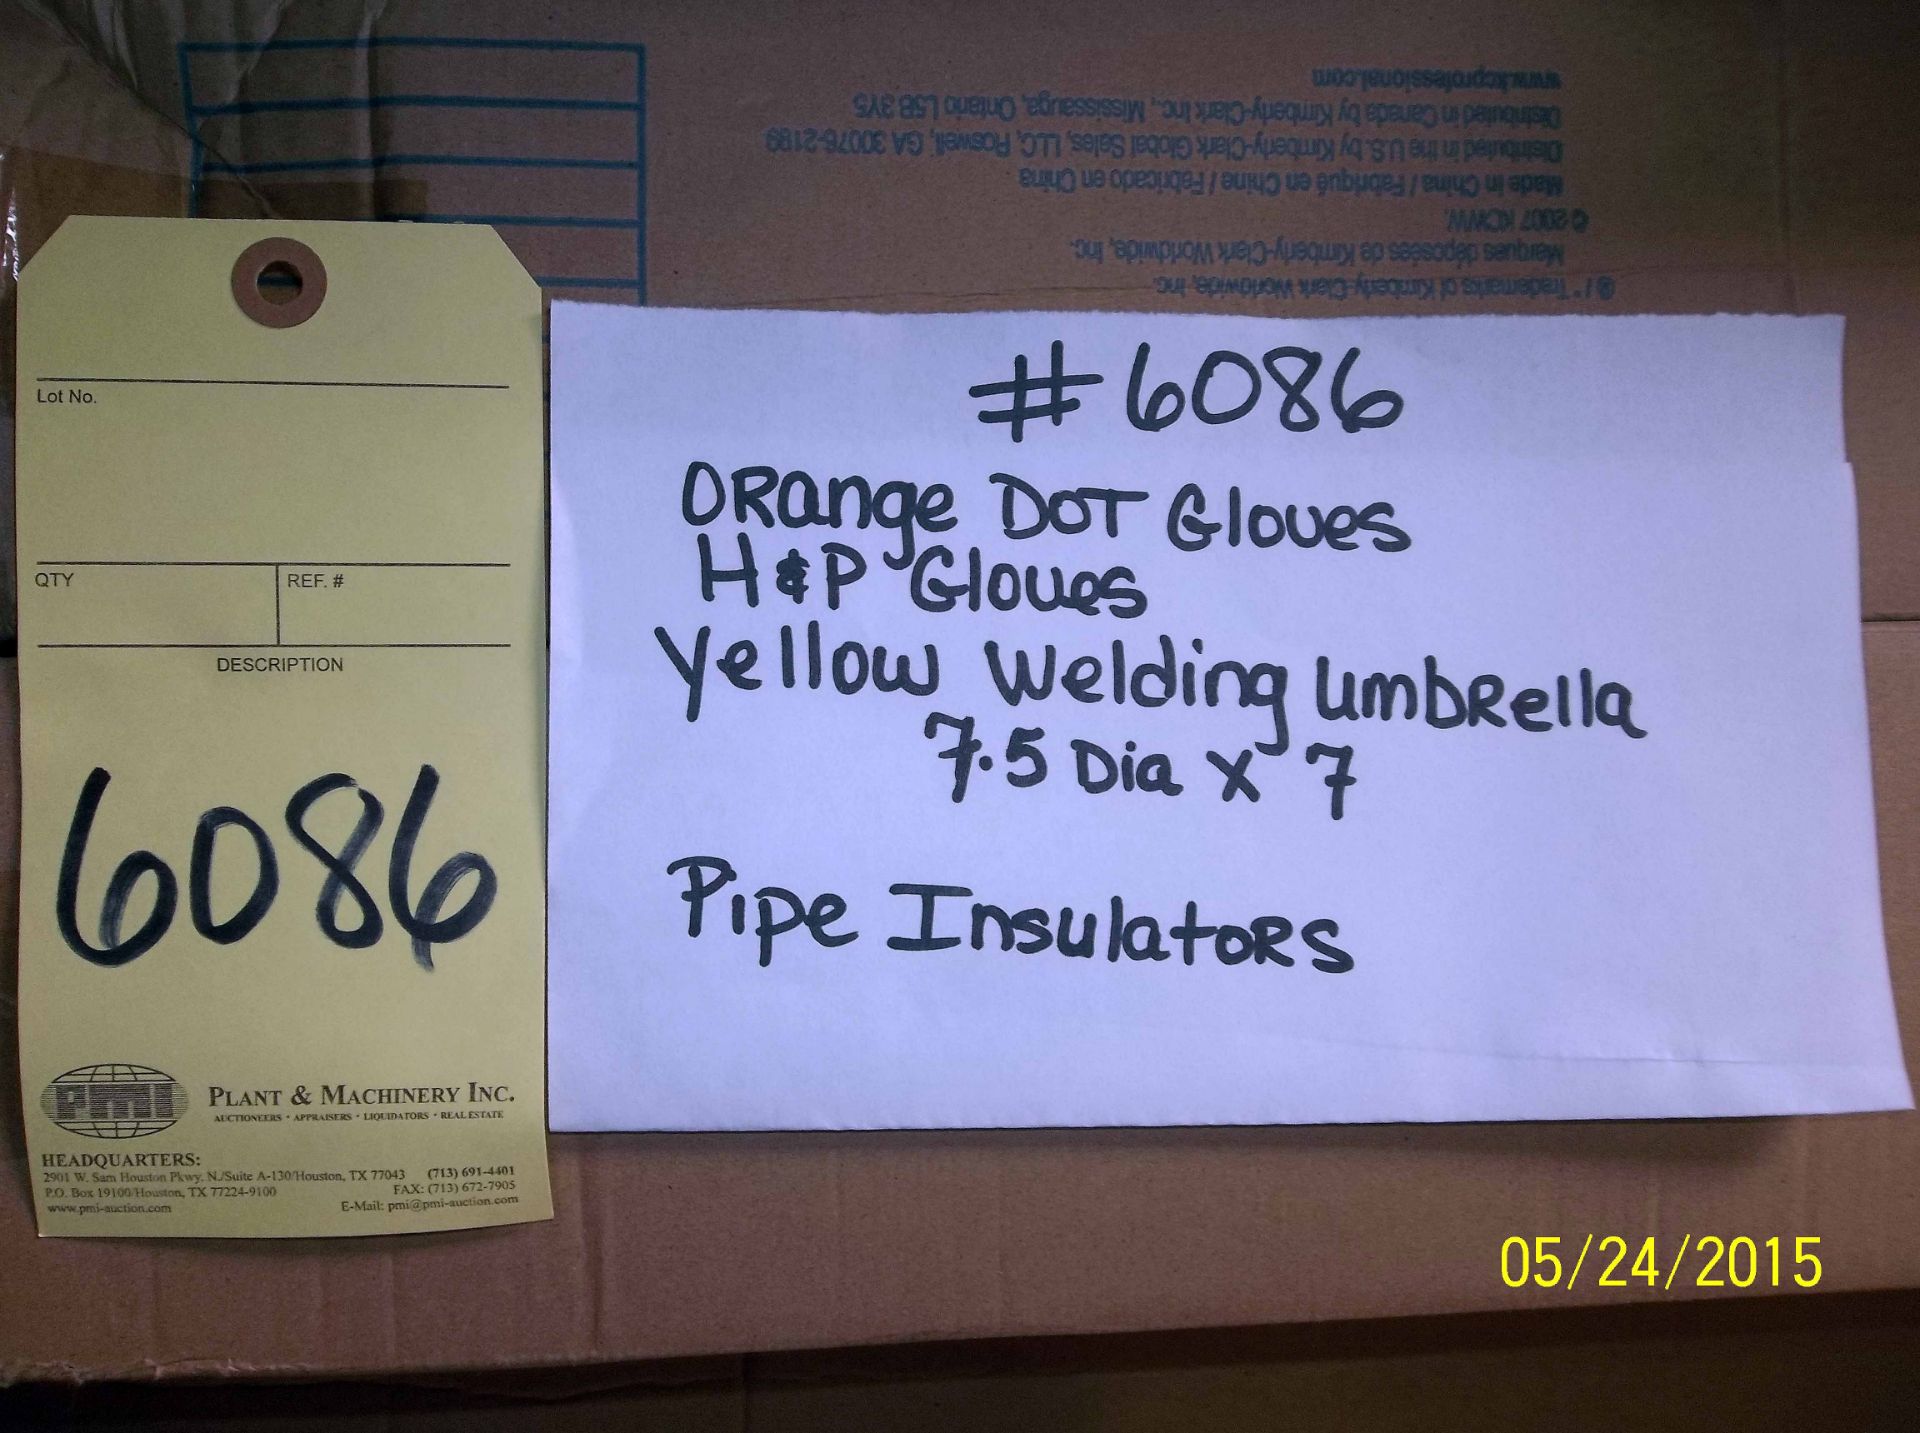 LOT CONSISTING OF ORANGE DOT GLOVES, H&P GLOVES, YELLOW WELDING UMBRELLA 7-1/2 DIA. X 7, PIPE - Image 2 of 2